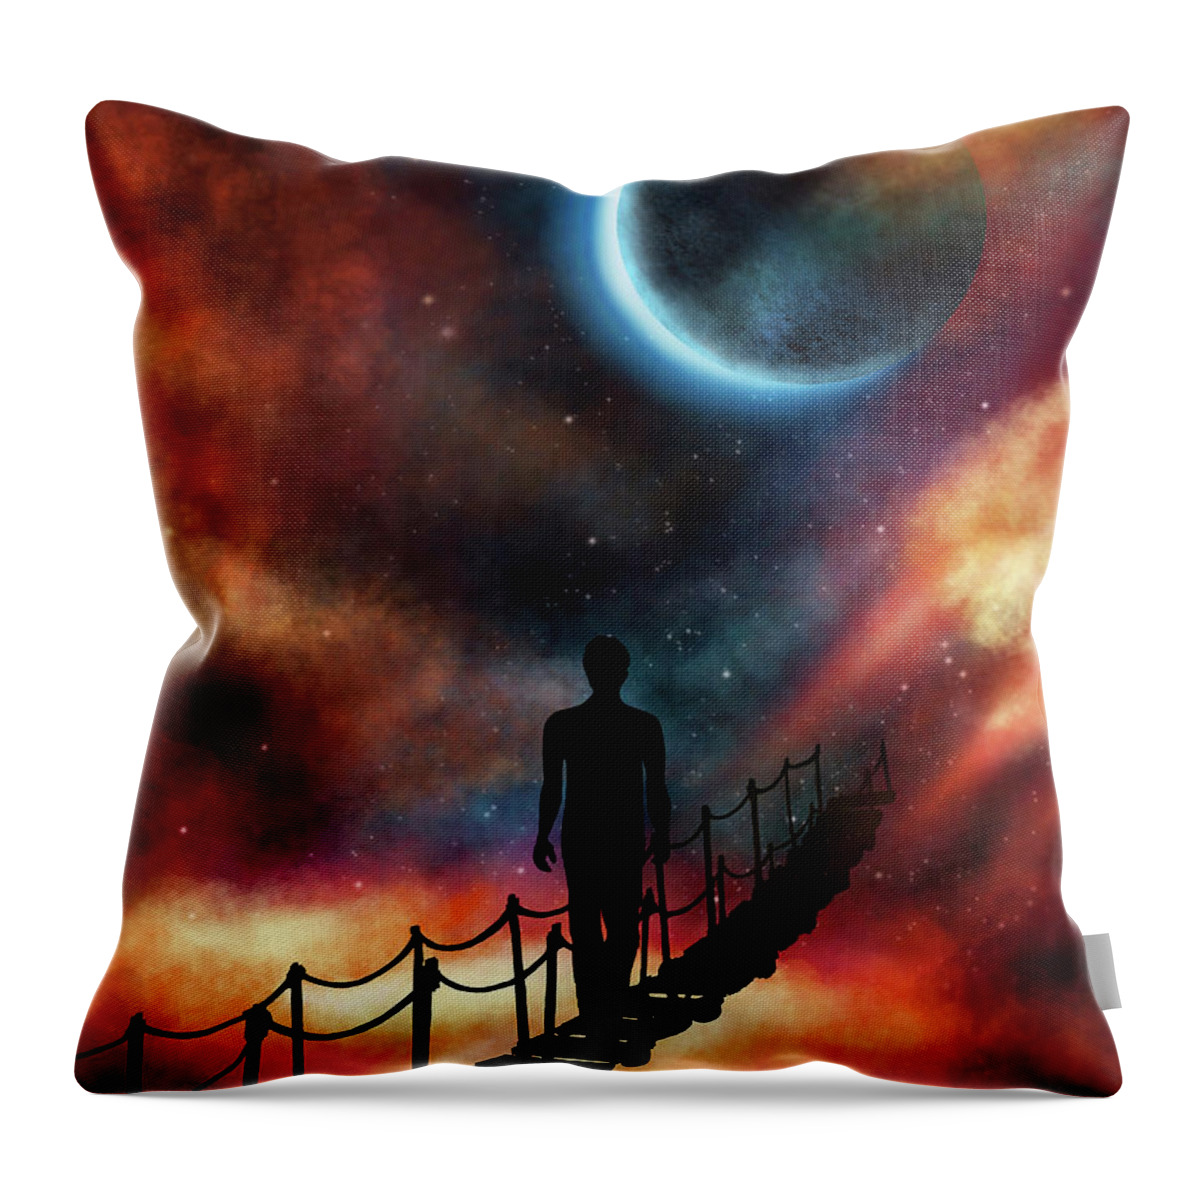 Nebula Throw Pillow featuring the painting The Next Right Step by Rachel Emmett